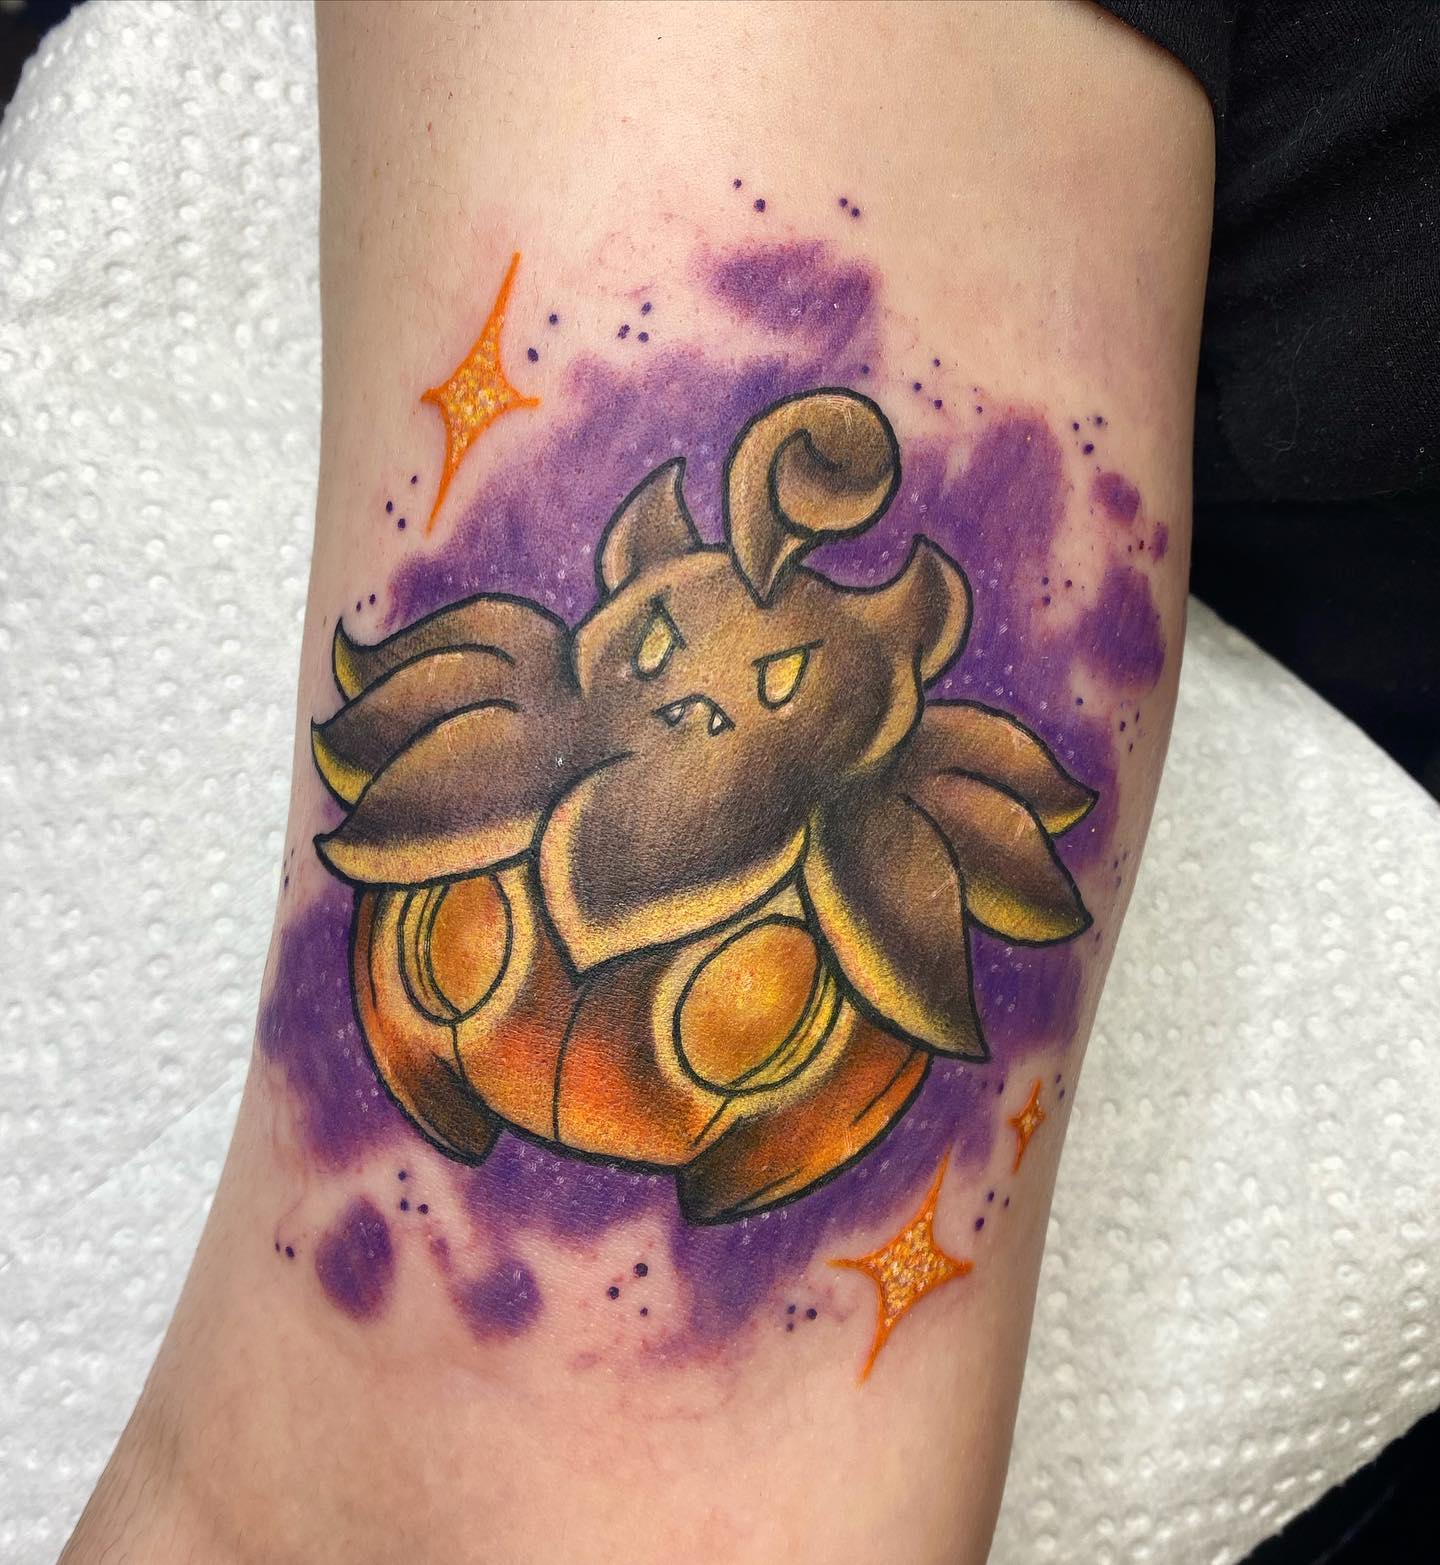 Pumpkaboo is a spooky ghost-type and its name means 